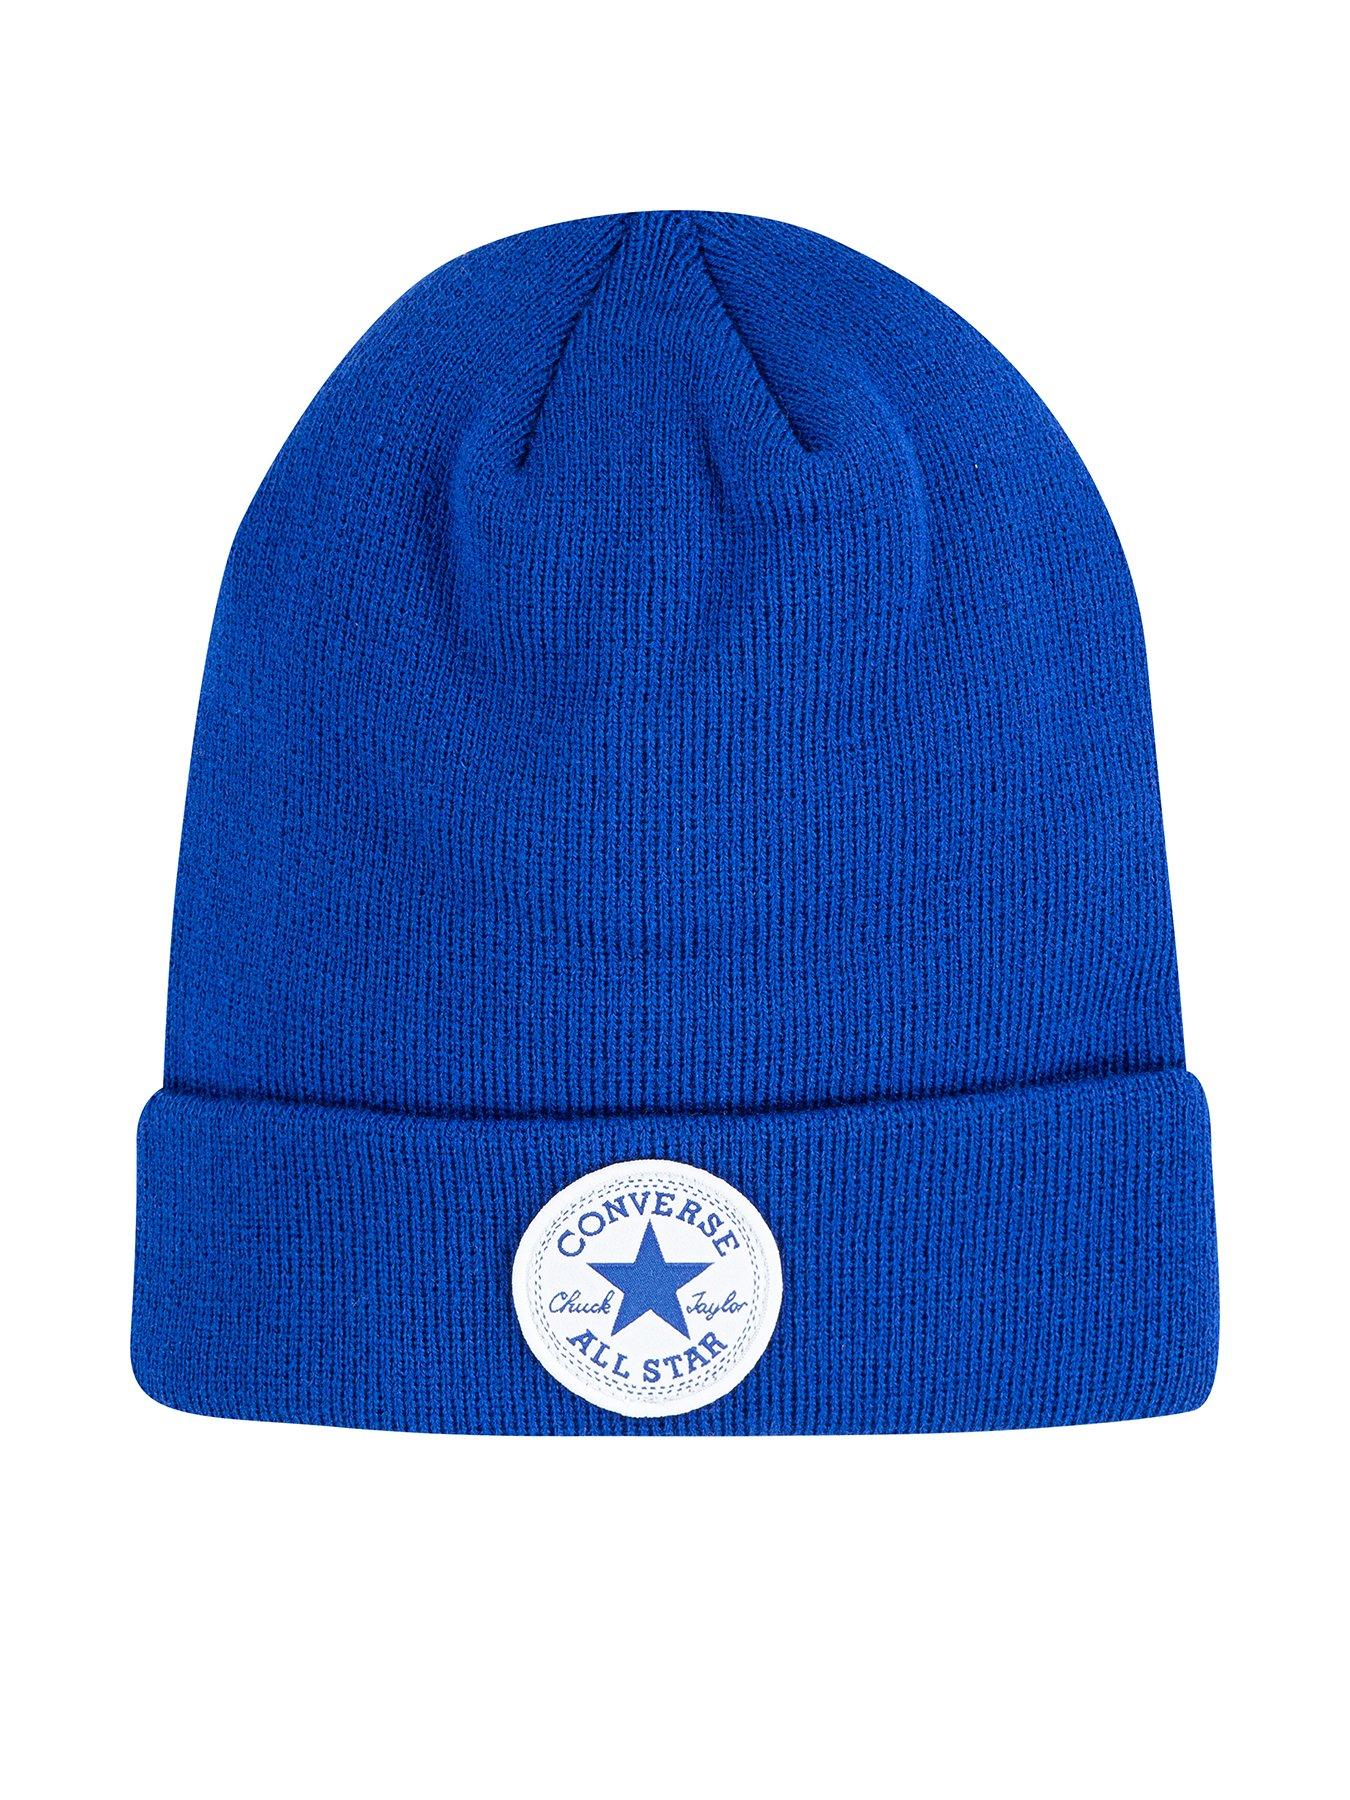 Converse Ctp Watch Cap At discountconverse.com - The Best Choice For All  the people